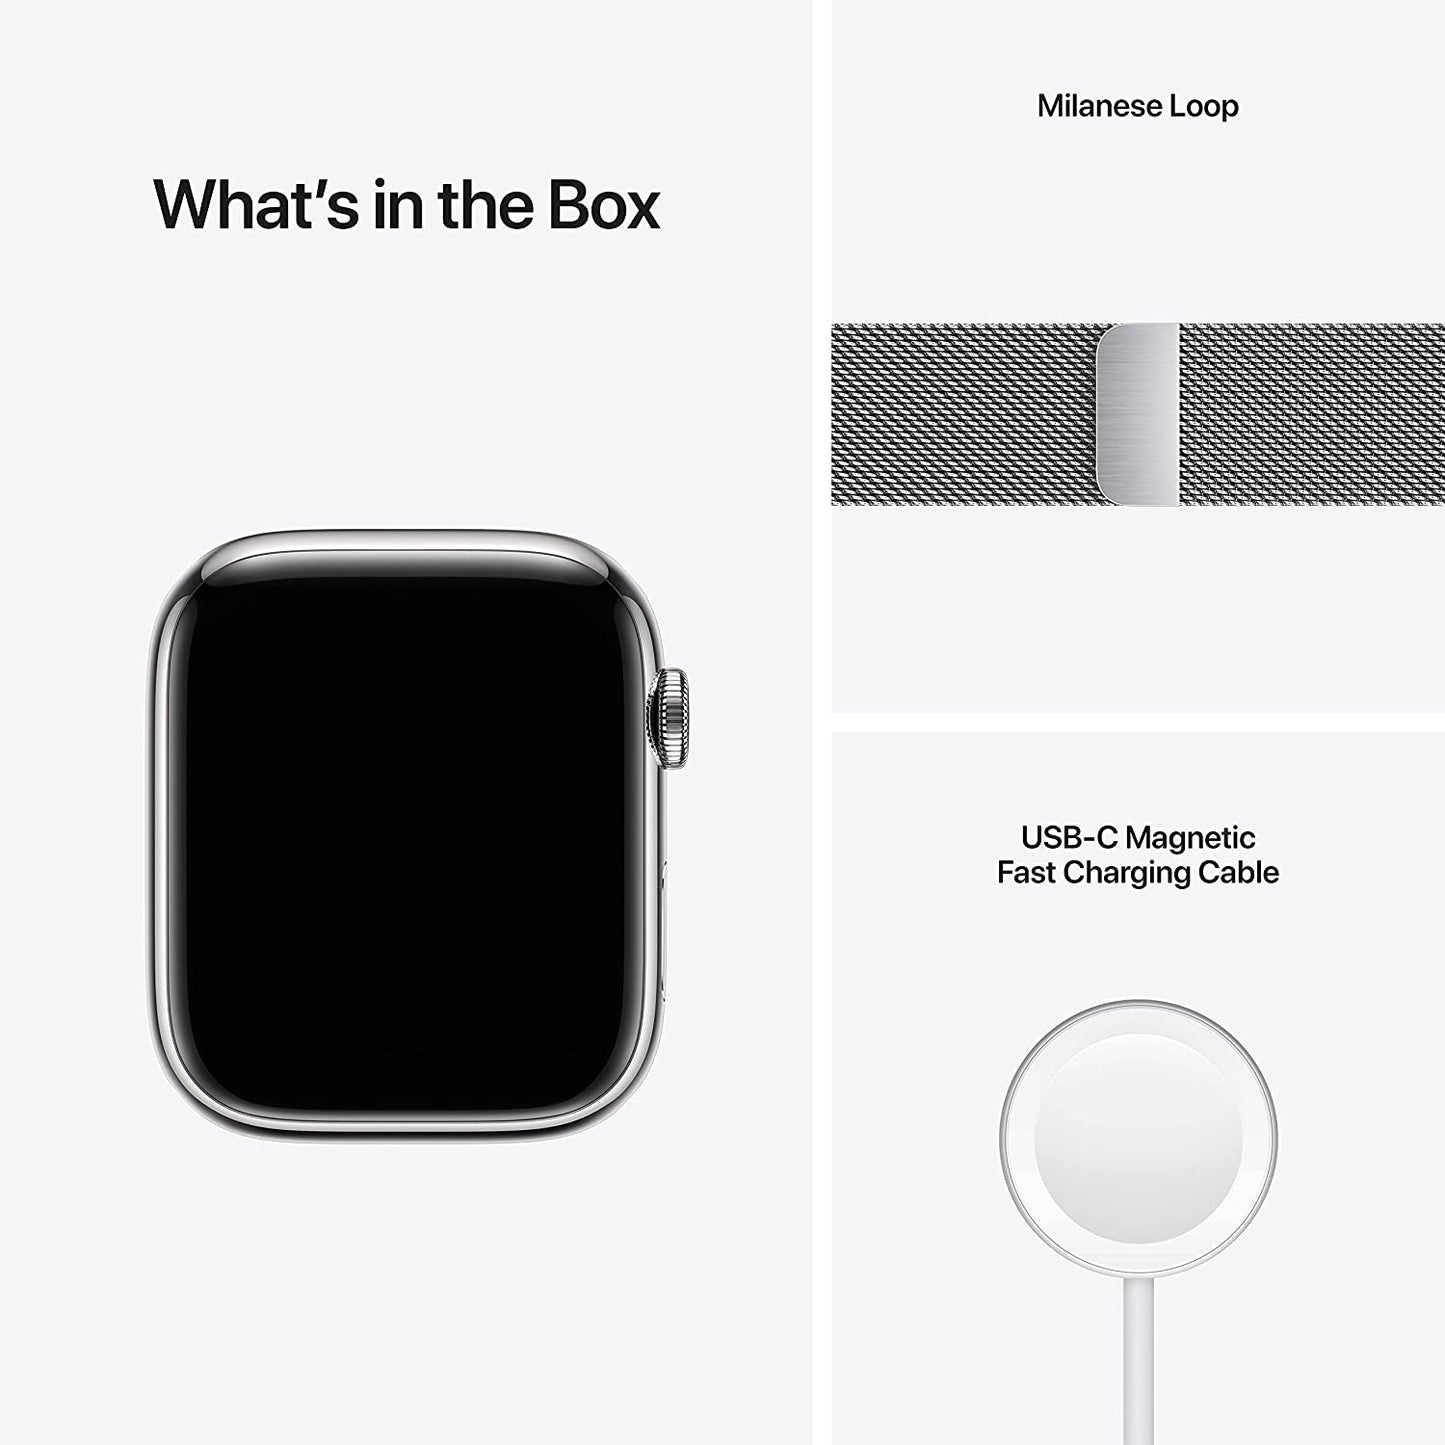 (Open Box) Apple Watch Series 7 GPS + Cellular, 45mm Silver Stainless Steel Case with Silver Milanese Loop